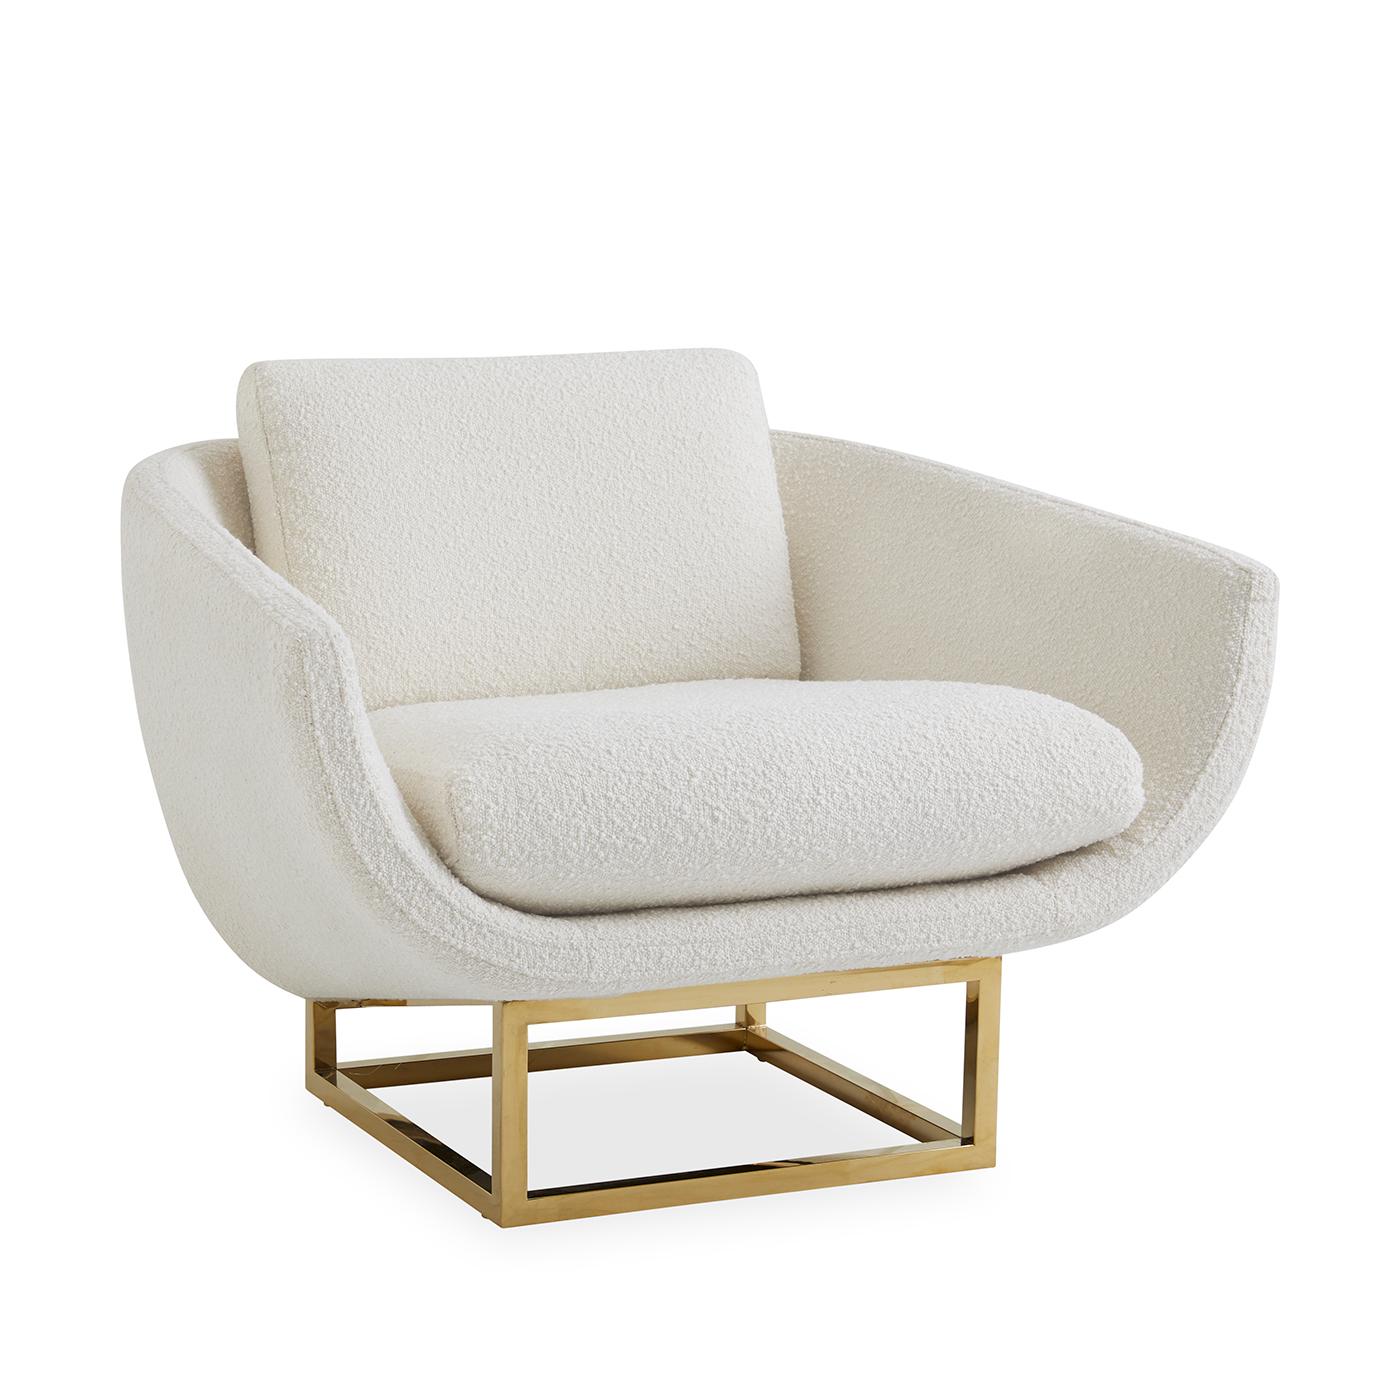 New Traditionalism. Minimalist rigor meets cocoon-y comfort. Our Beaumont collection's architectural yet airy bases are juxtaposed with silhouettes softened by sculptural flair. Balance and geometry get a glamorous lift from shiny polished brass and